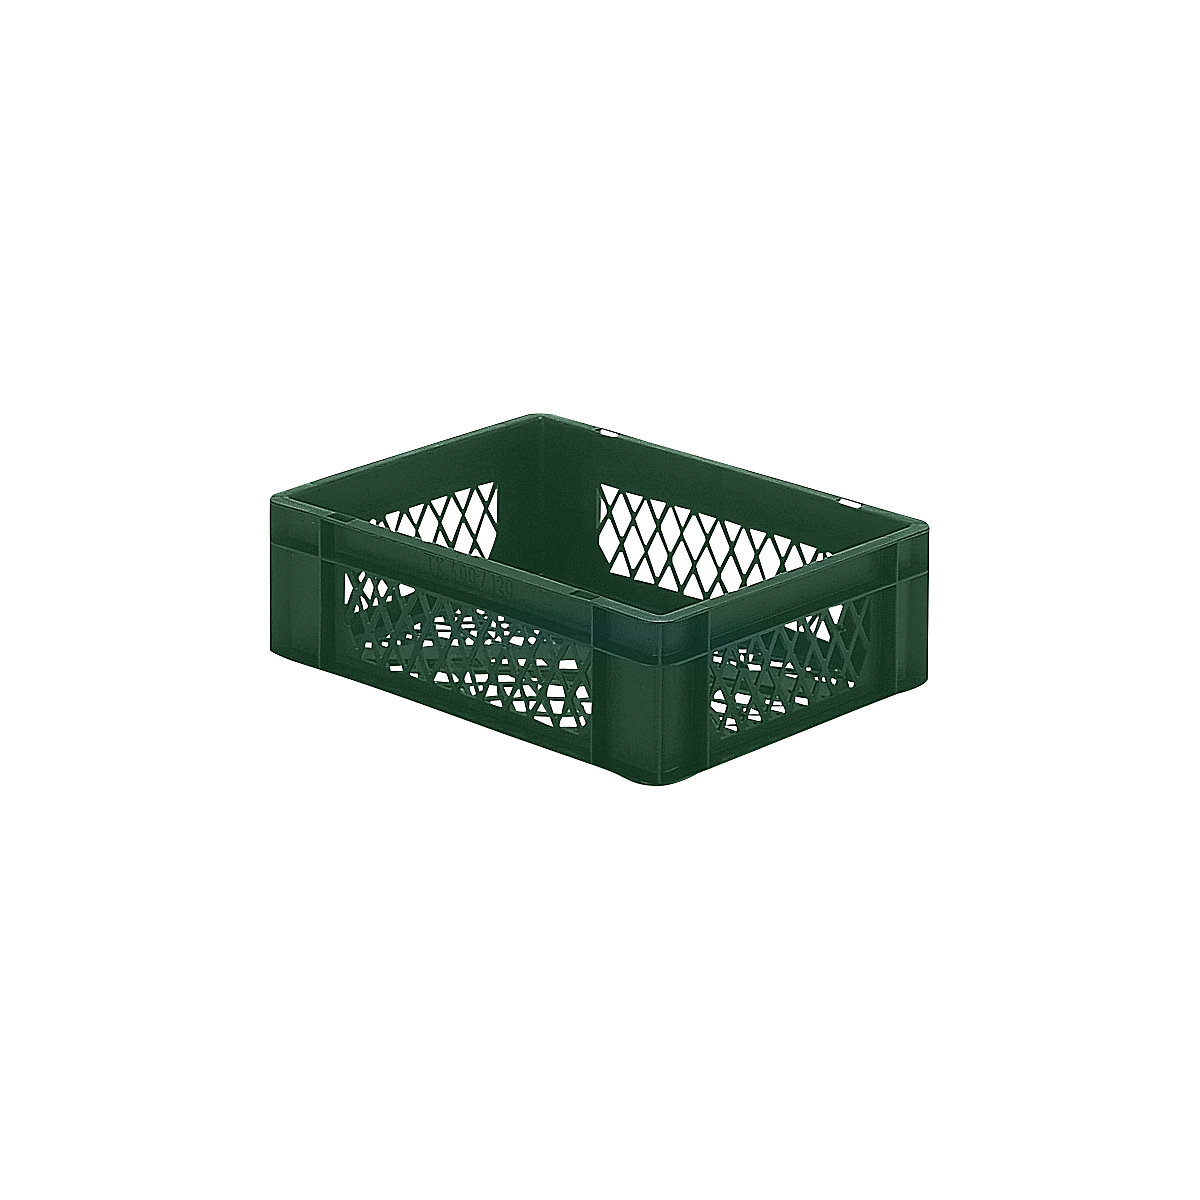 Euro stacking container, perforated walls and base, LxWxH 400 x 300 x 120 mm, green, pack of 5